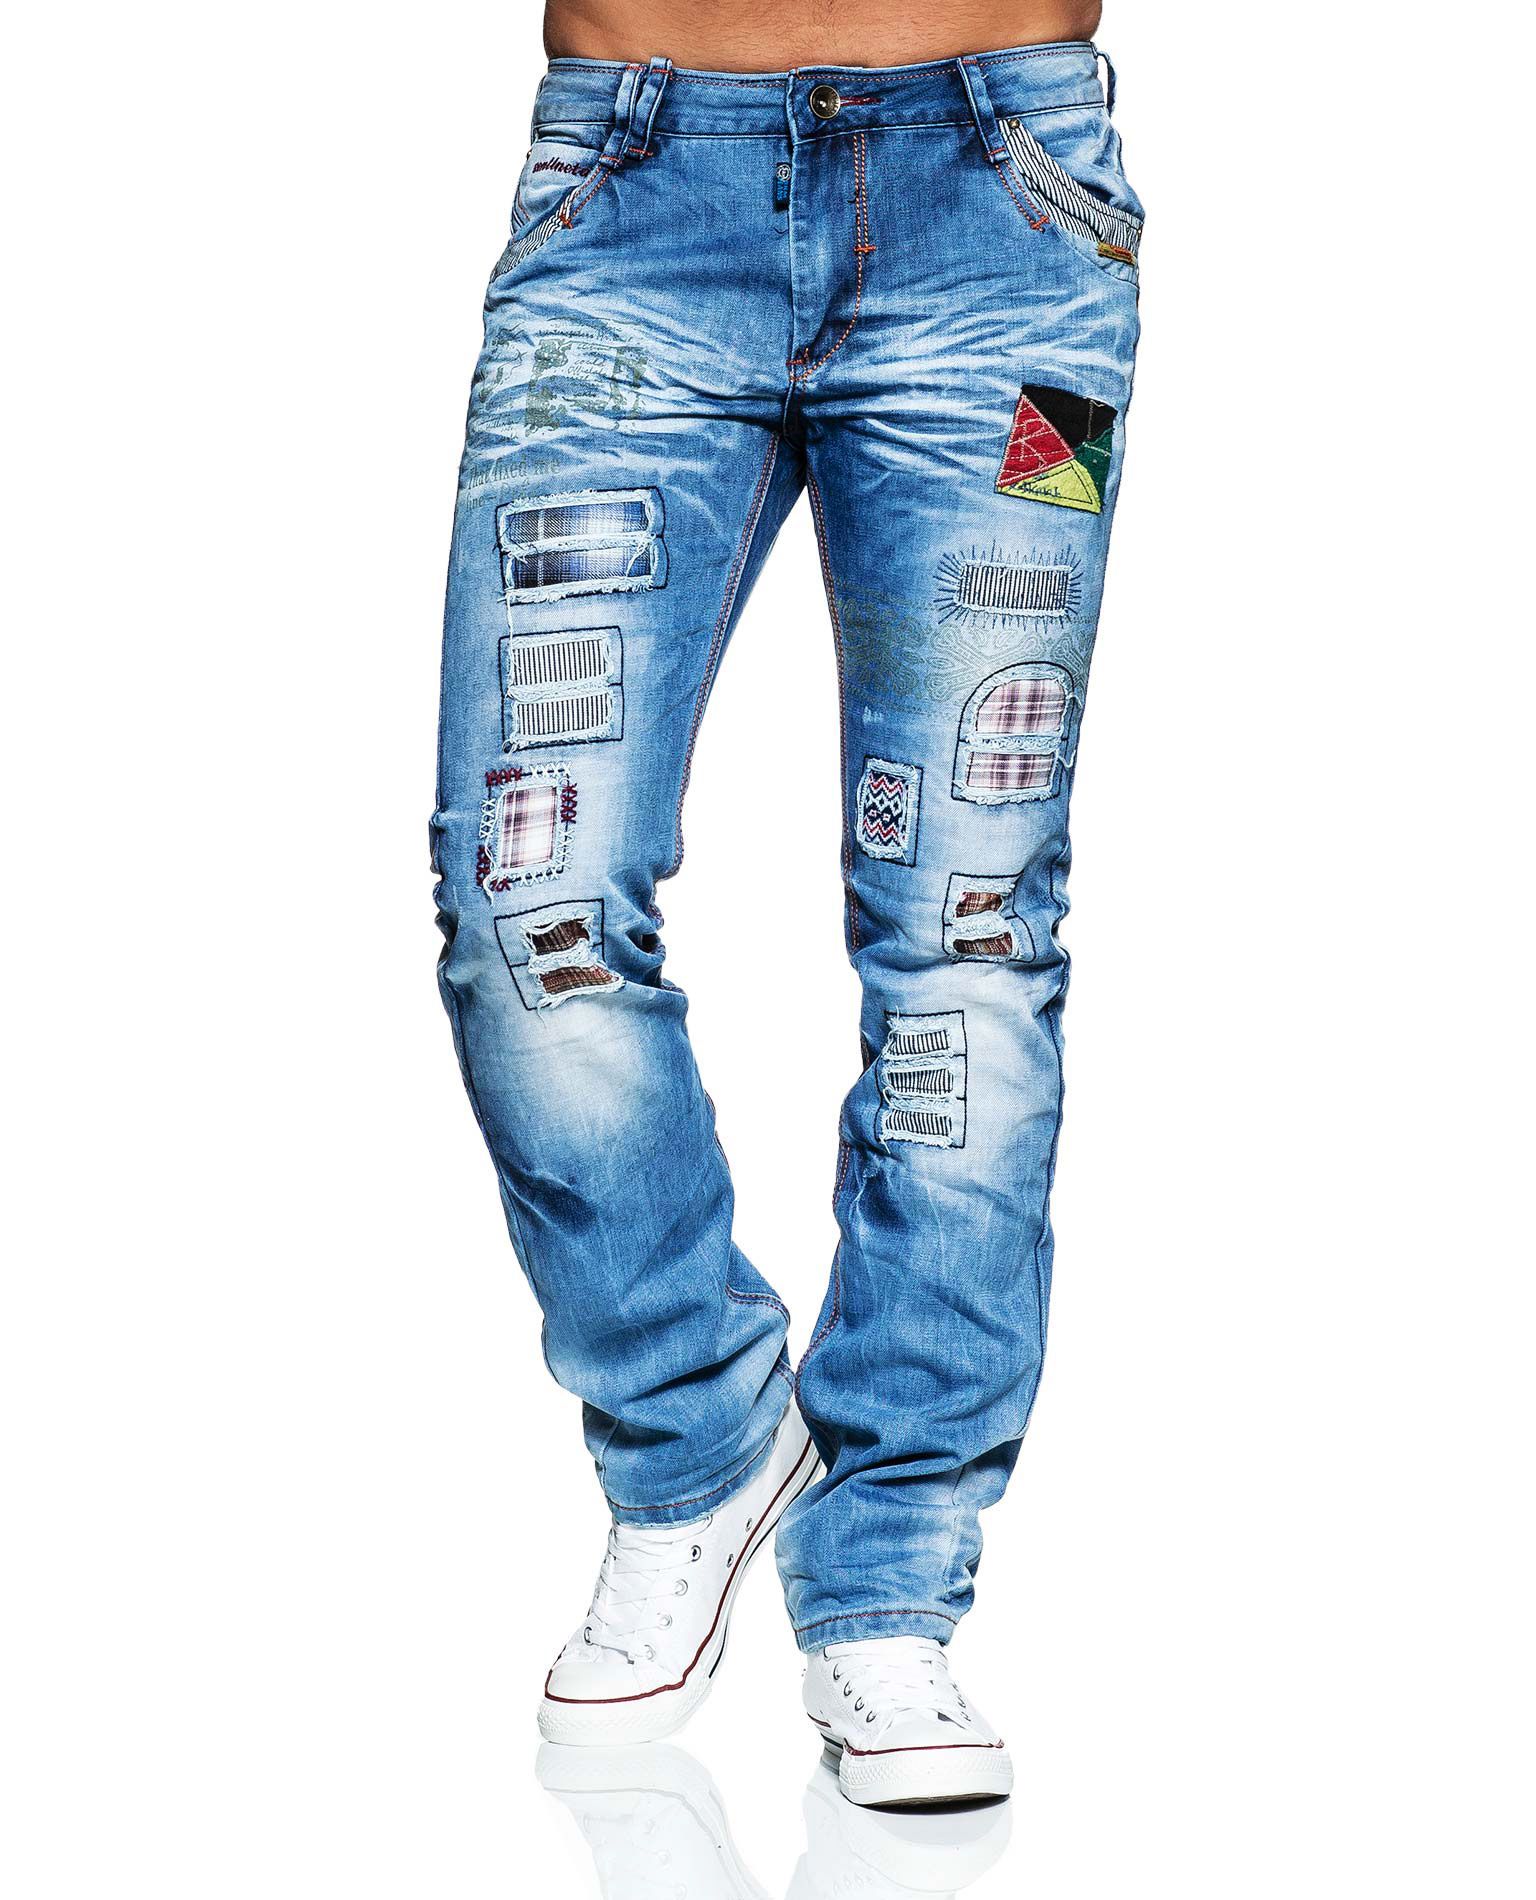 ross jeans